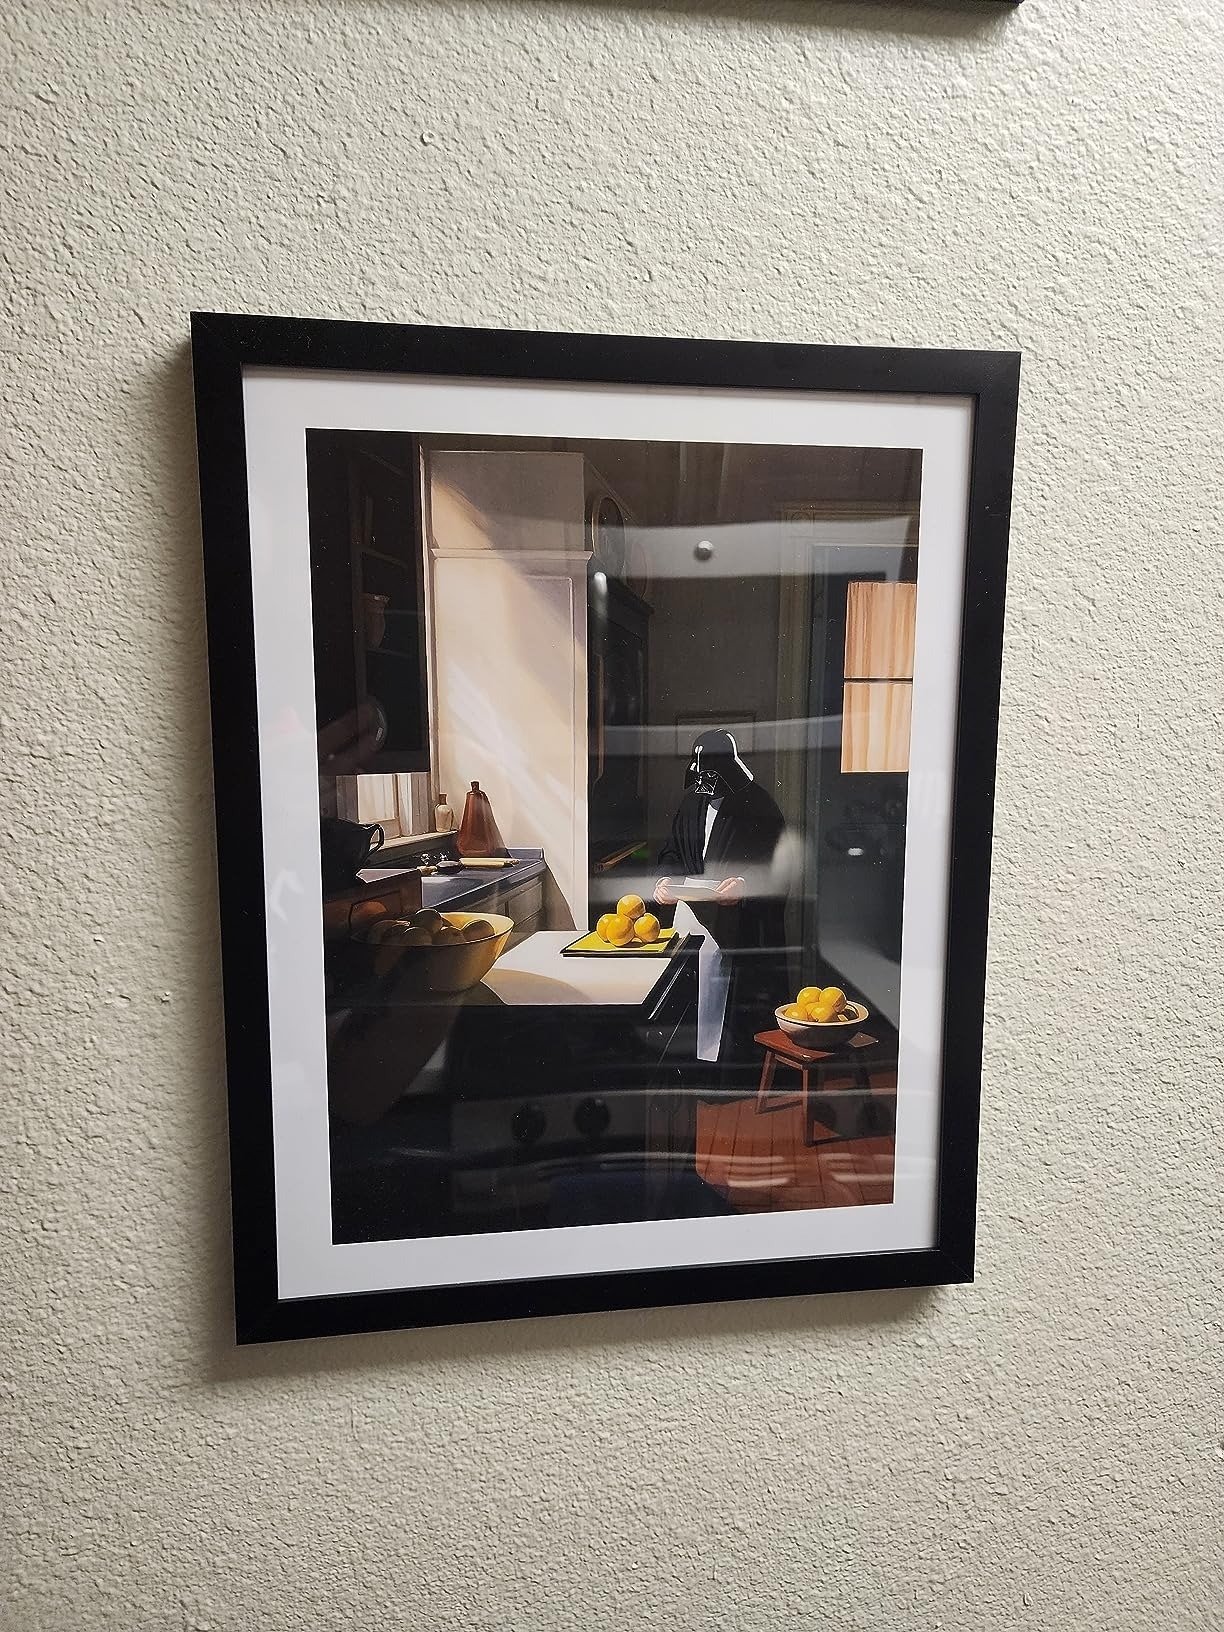 Darth Vader art print with Darth Vader in a kitchen on a wall